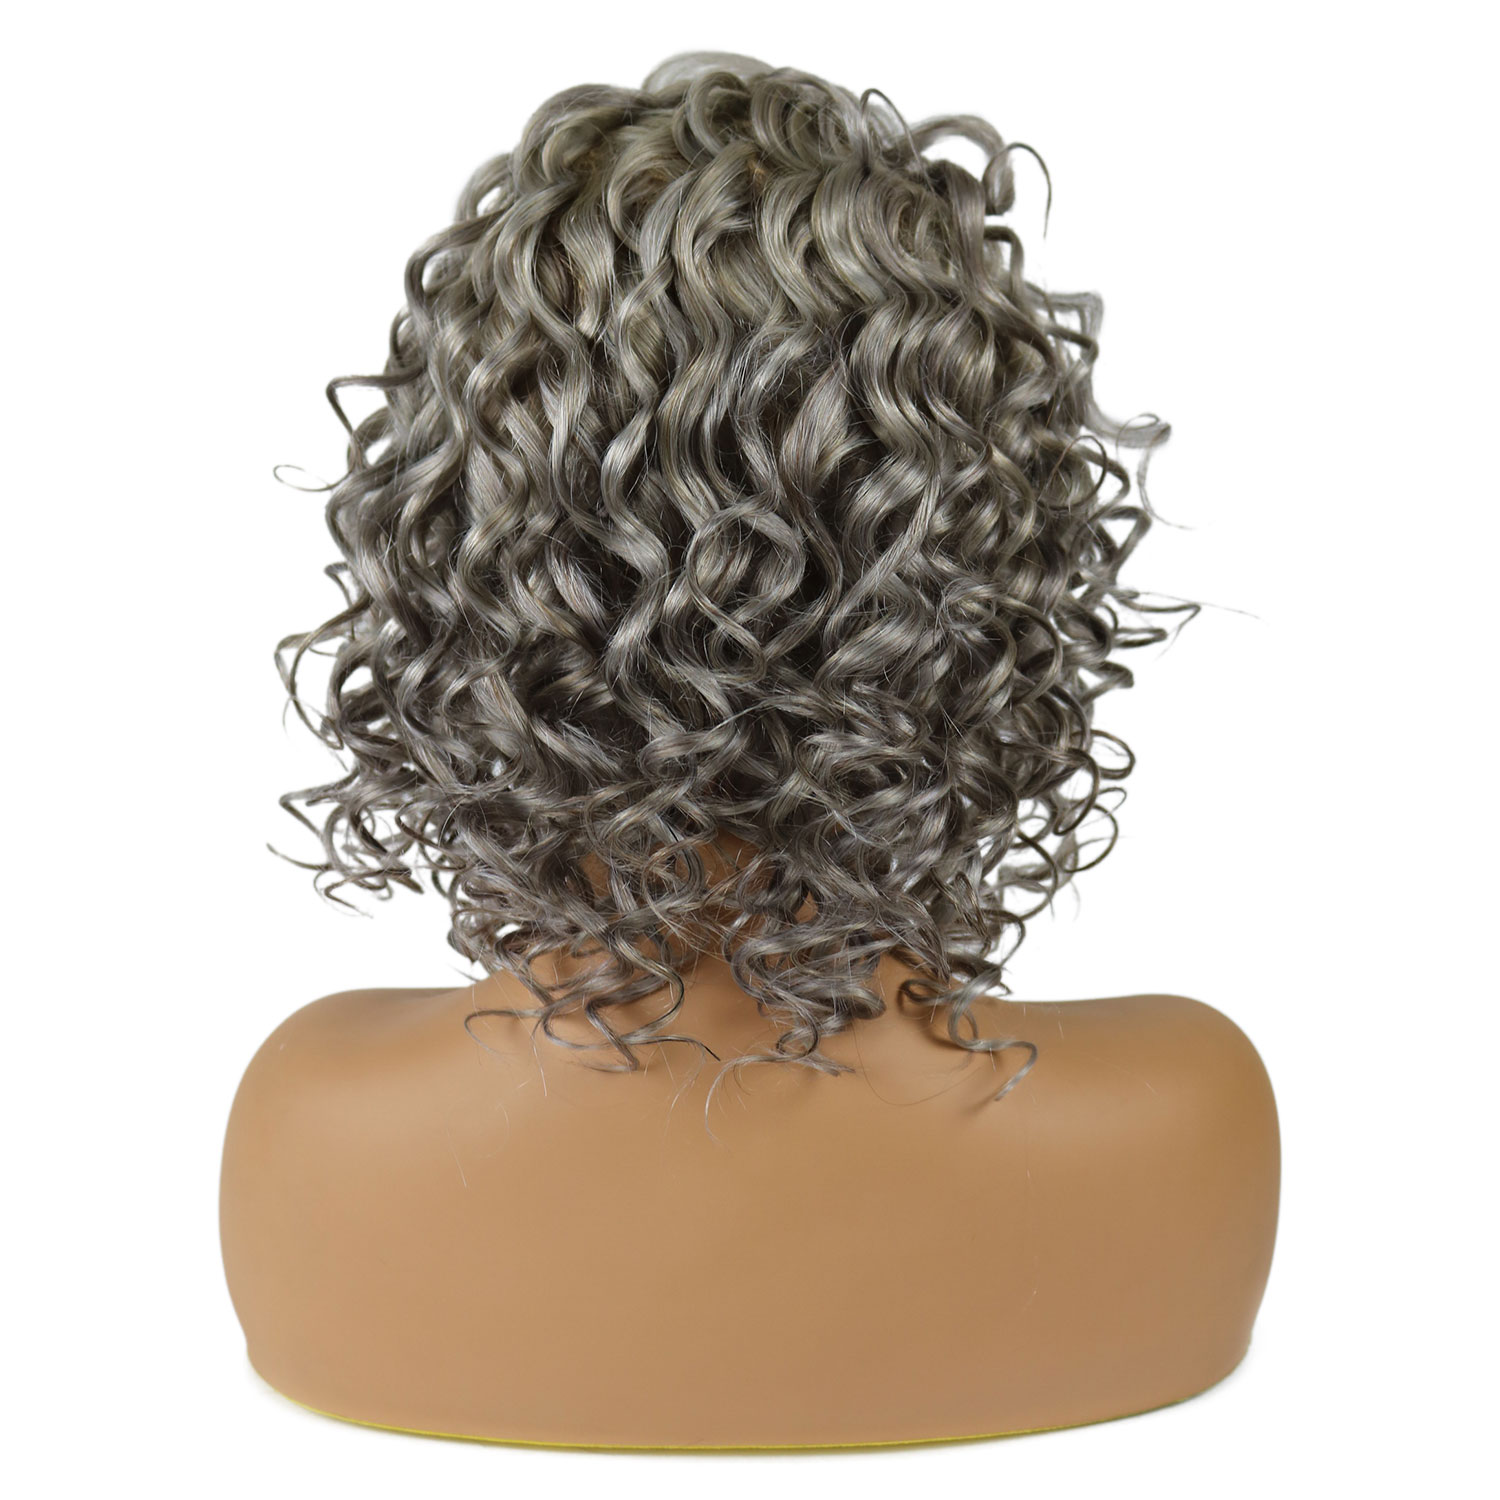 Salt and Pepper Hair Medium Length Human Hair Lace Front Curly Wigs 18 ...